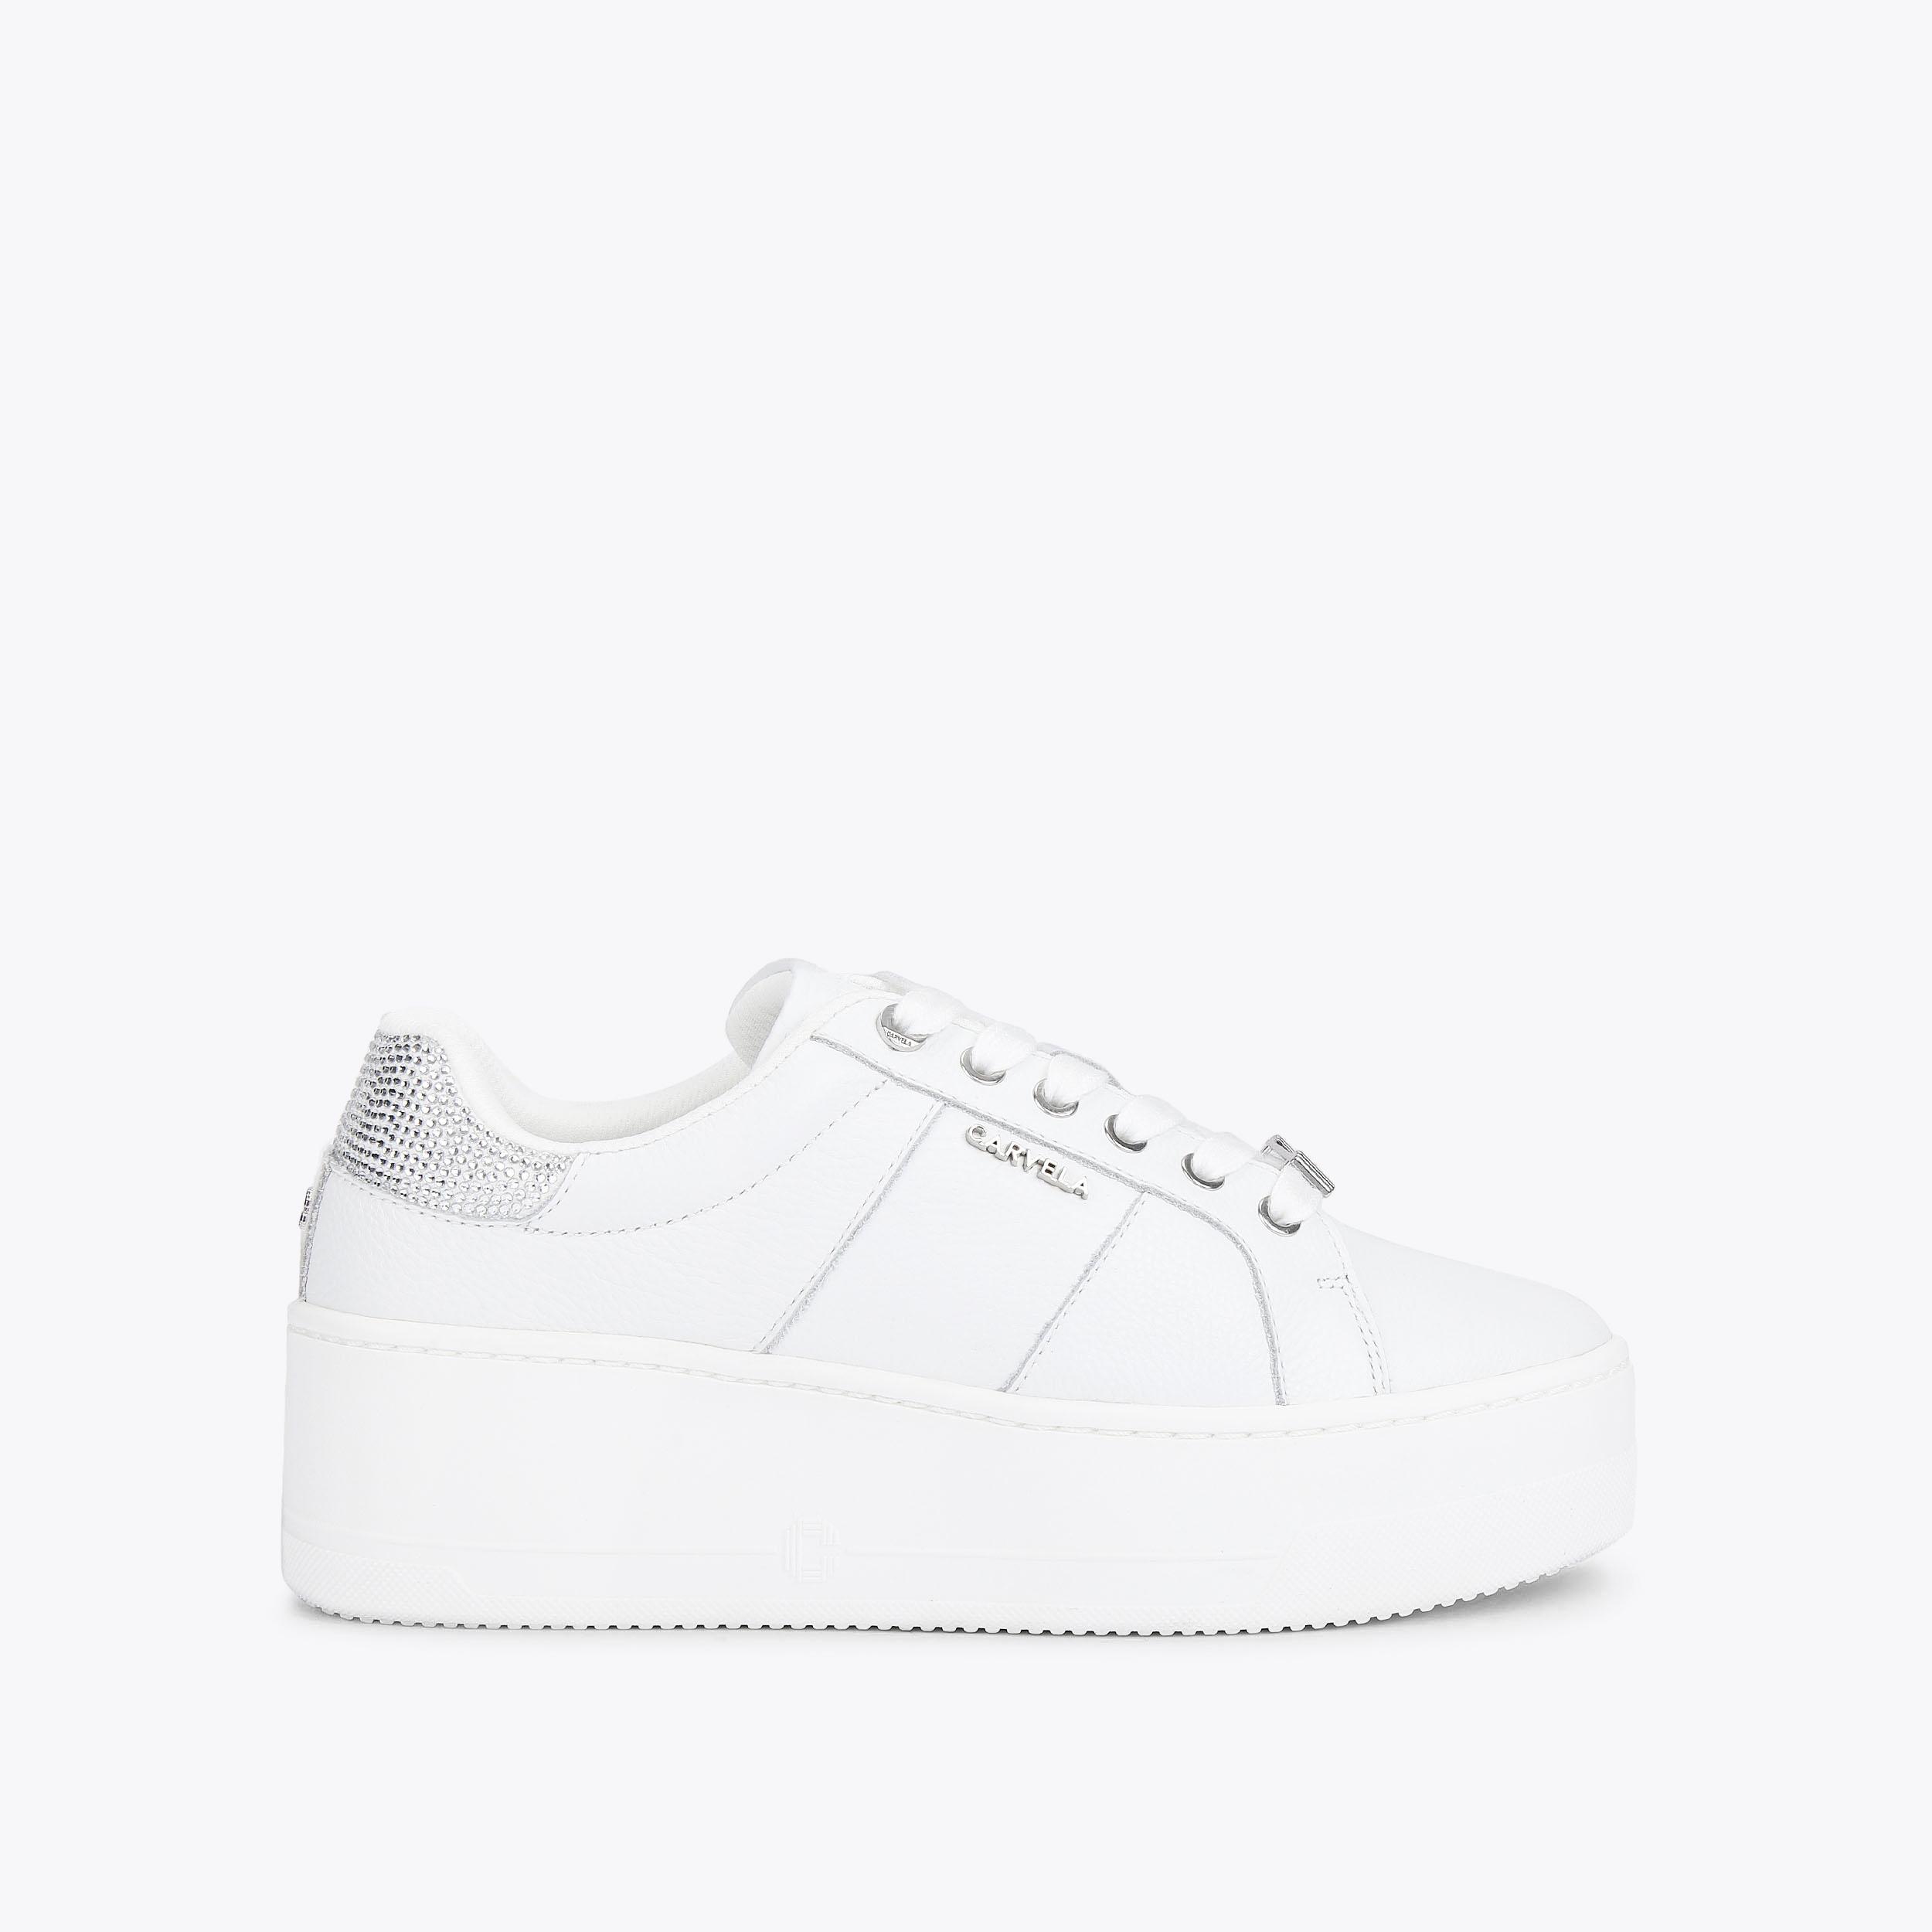 CONNECTED White Leather Lace Up Trainer by CARVELA